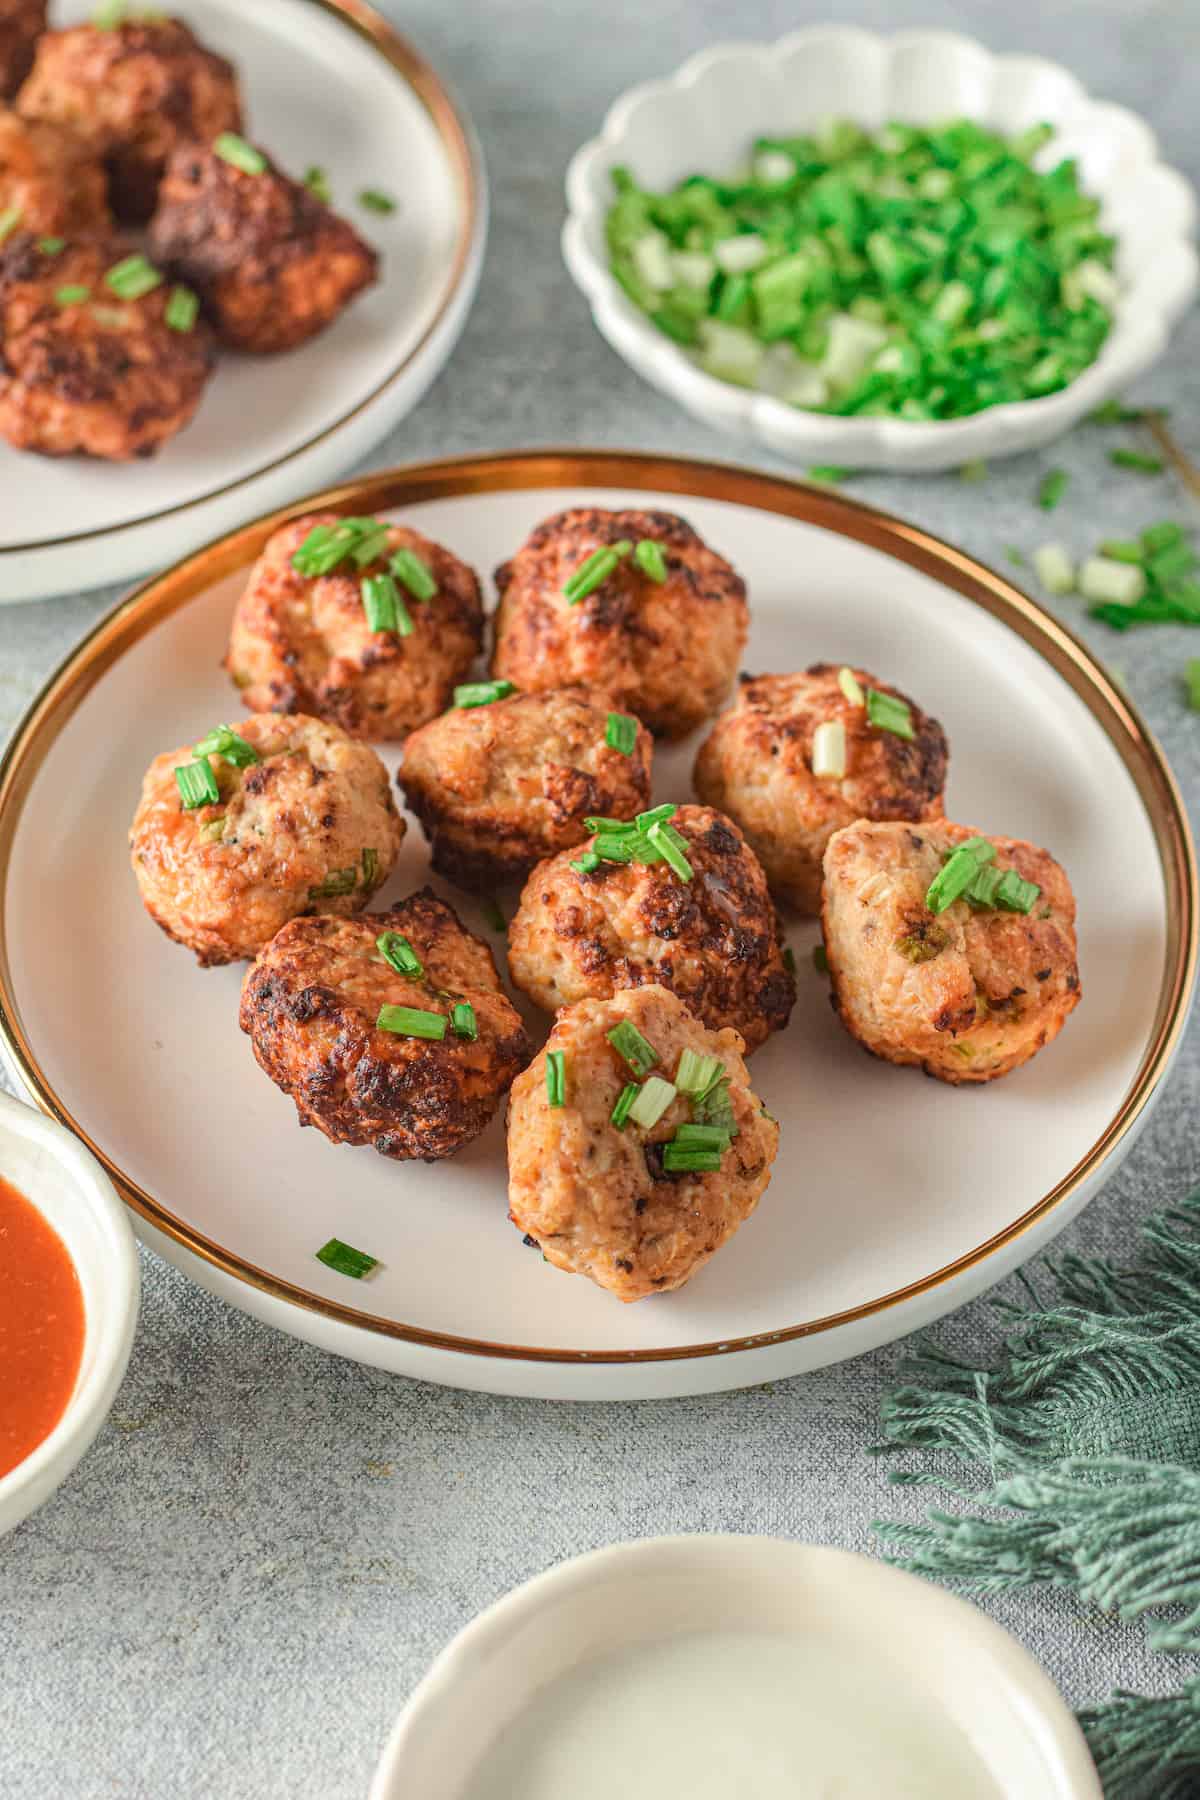 Meatballs on a white plate with green onions and more meatballs in background.